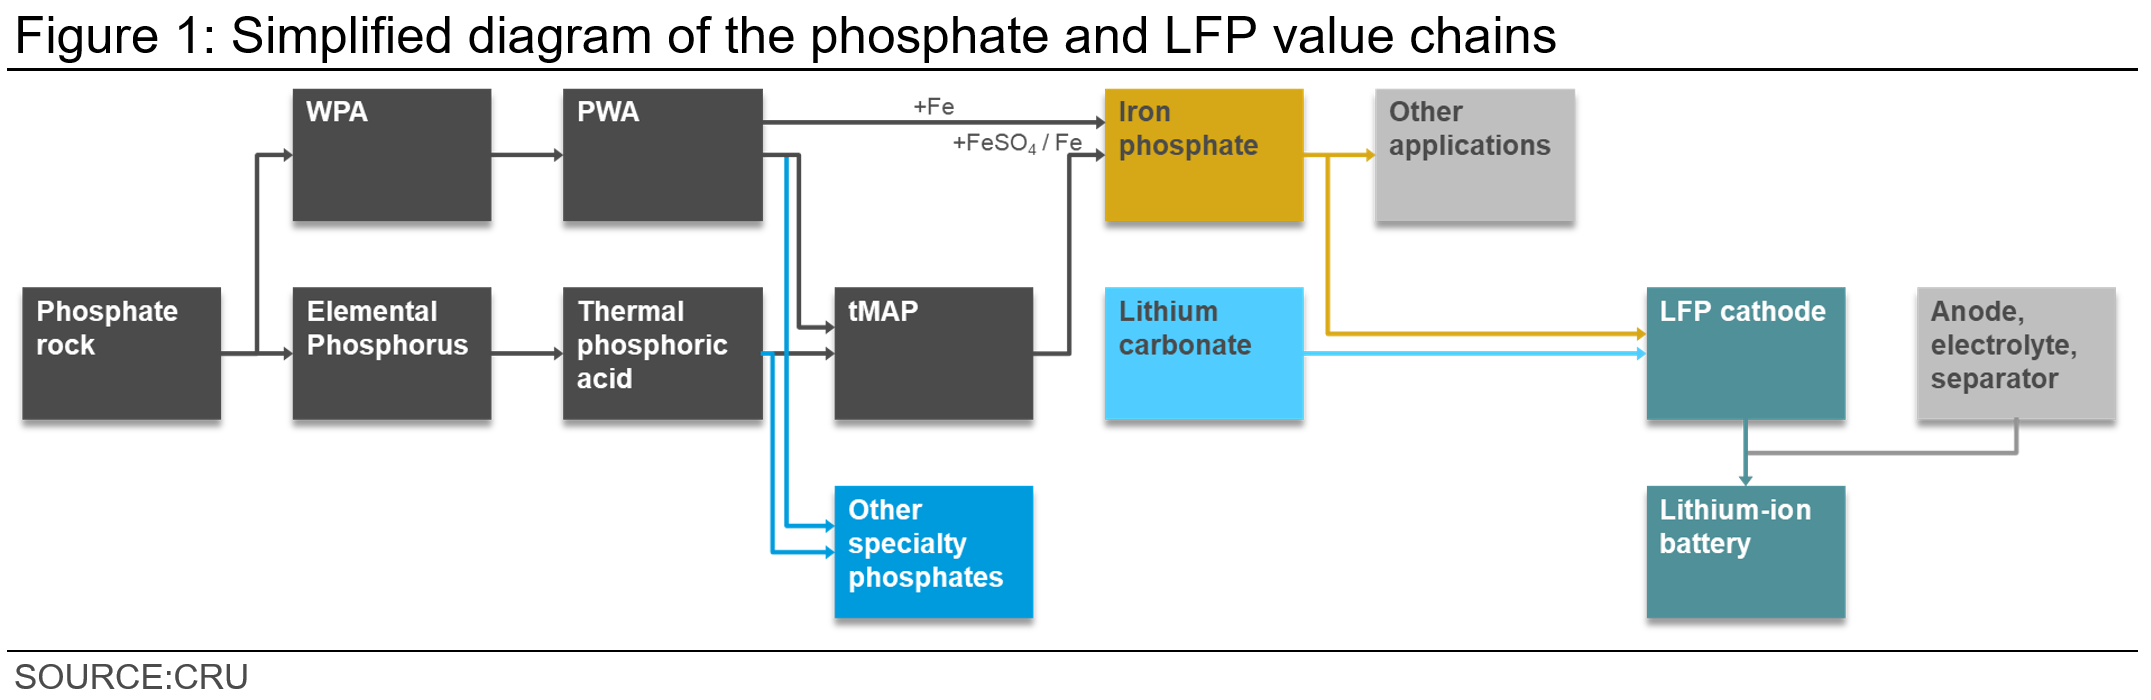 Simplified diagram of the phosphate and LFP value chains